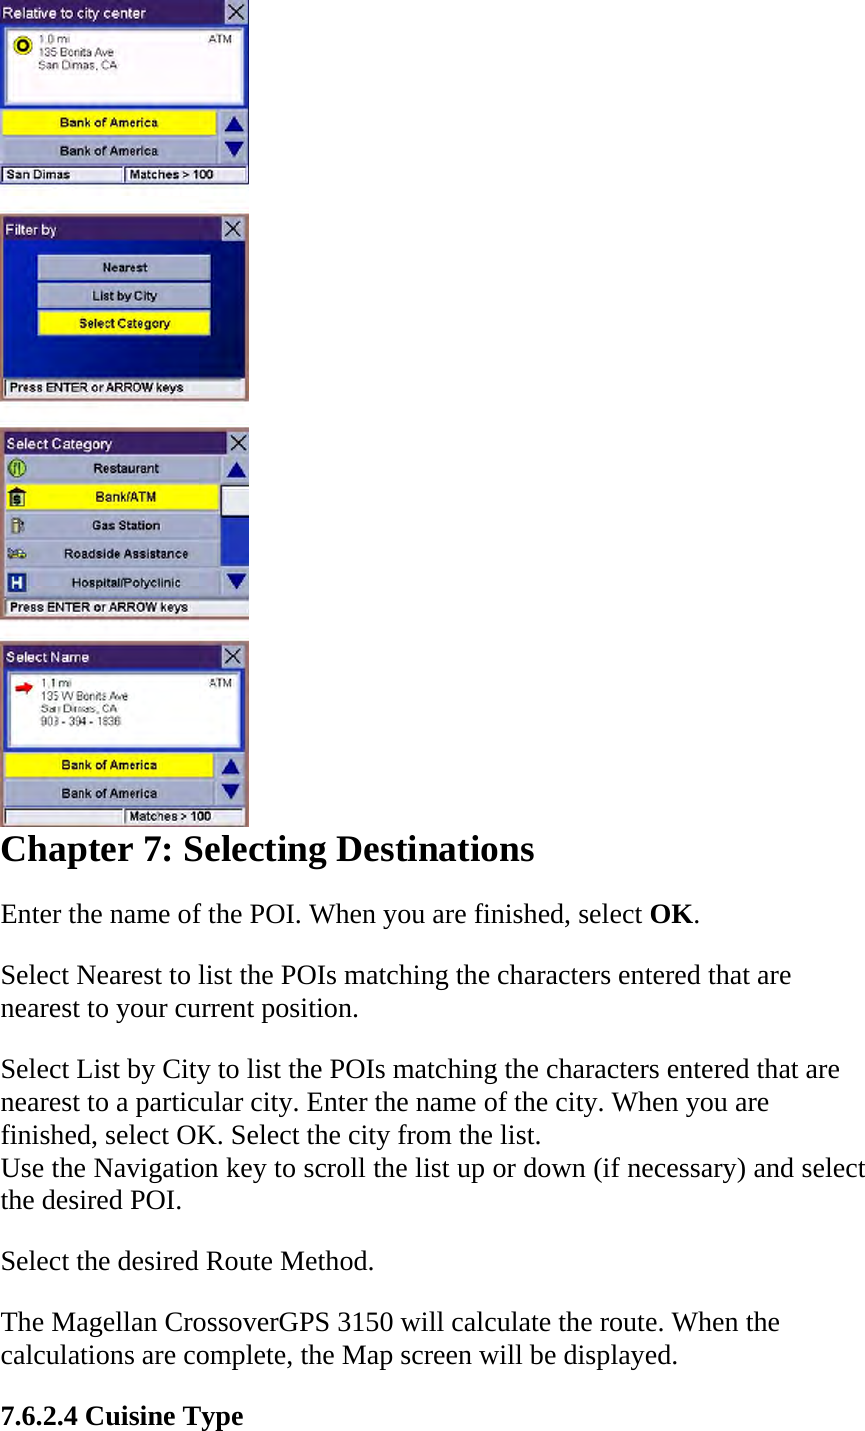  Chapter 7: Selecting Destinations  Enter the name of the POI. When you are finished, select OK.  Select Nearest to list the POIs matching the characters entered that are nearest to your current position.  Select List by City to list the POIs matching the characters entered that are nearest to a particular city. Enter the name of the city. When you are finished, select OK. Select the city from the list.  Use the Navigation key to scroll the list up or down (if necessary) and select the desired POI.  Select the desired Route Method.  The Magellan CrossoverGPS 3150 will calculate the route. When the calculations are complete, the Map screen will be displayed.  7.6.2.4 Cuisine Type  